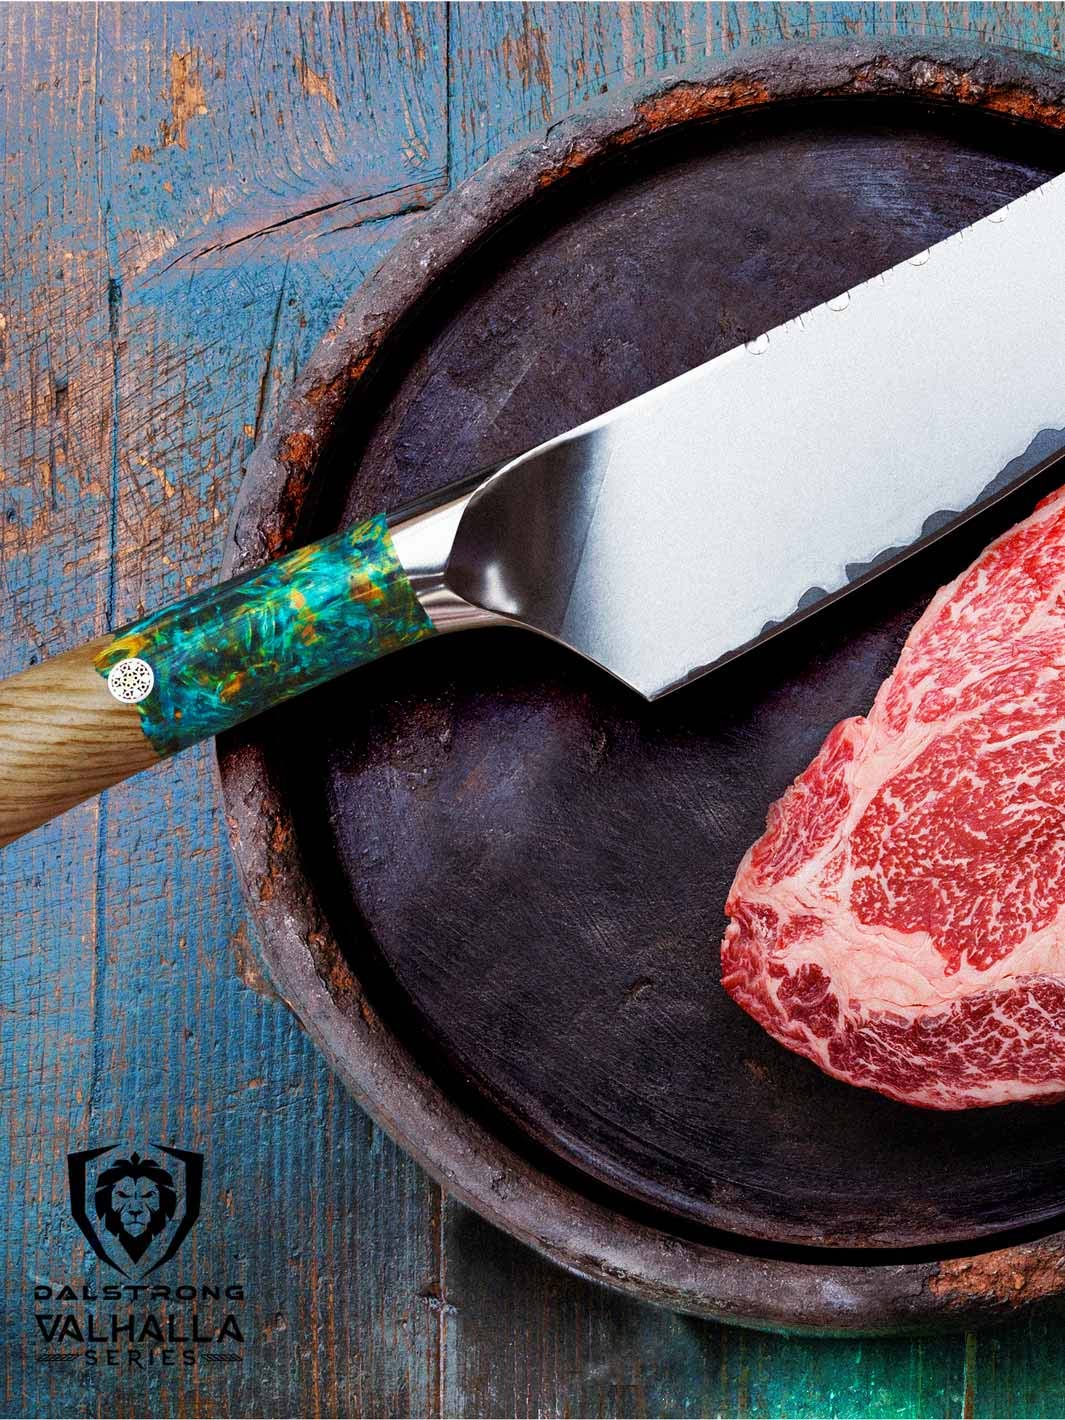 Dalstrong valhalla series 8 inch chef knife with wooden handle and a steak.